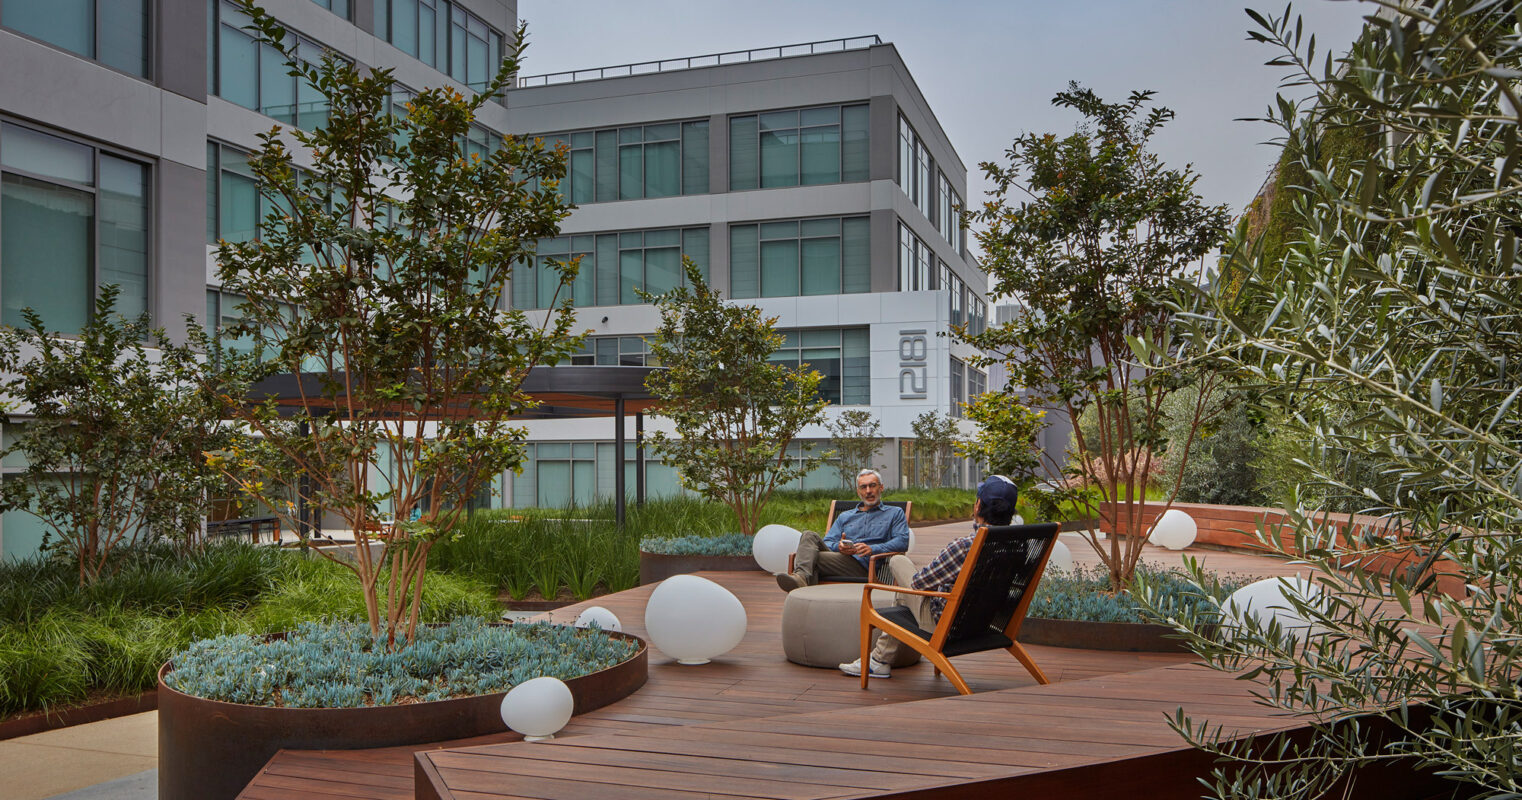 Modern exterior breakout space with an organic design, featuring wooden curved benches interspersed with lush greenery and spherical white lights, complementing the angular architecture of surrounding buildings.